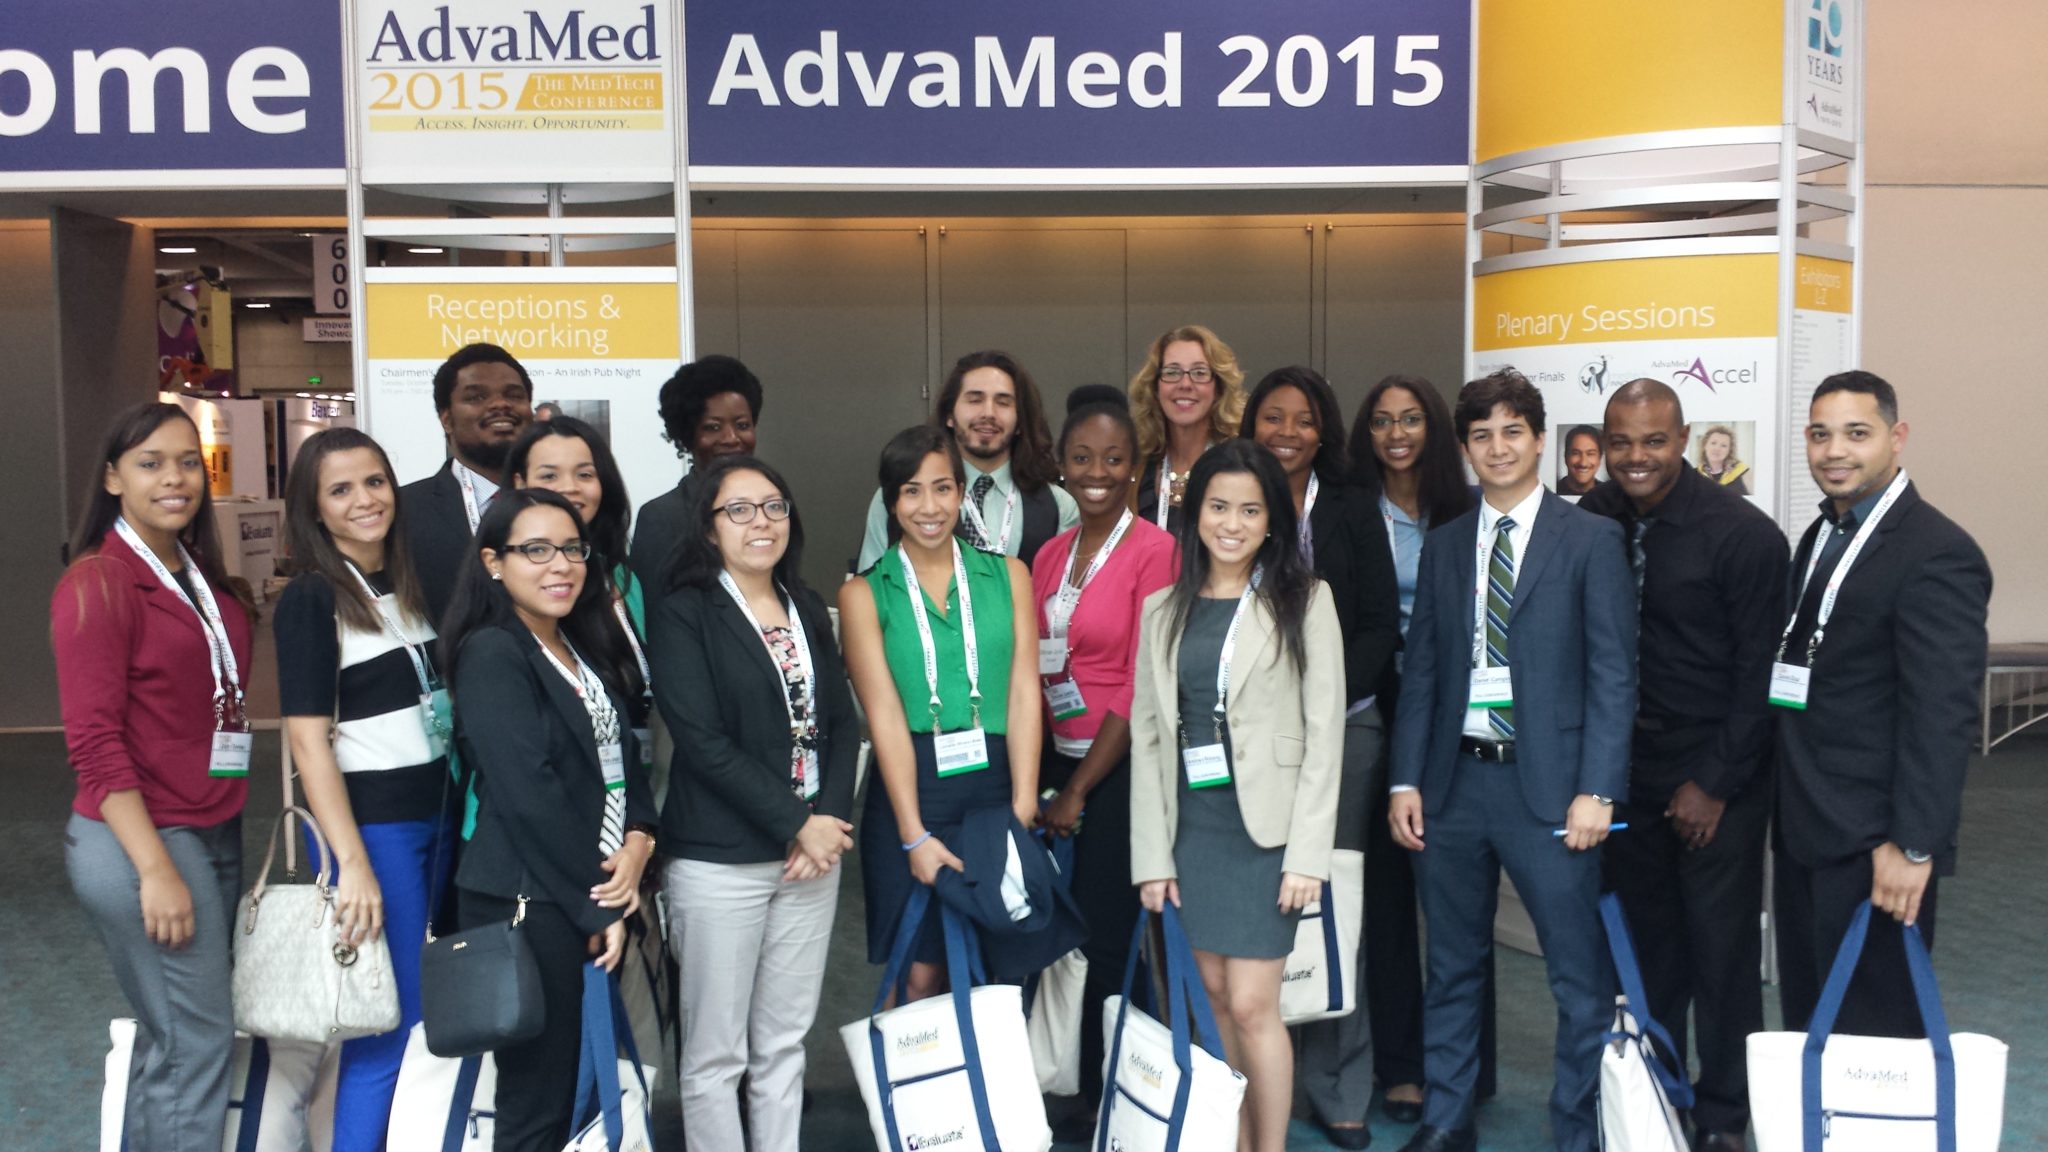 All Scholars taking a picture with Sheri Dodd (Vice President and General Manager, Patient Management Services at Medtronic) at Adva Med.